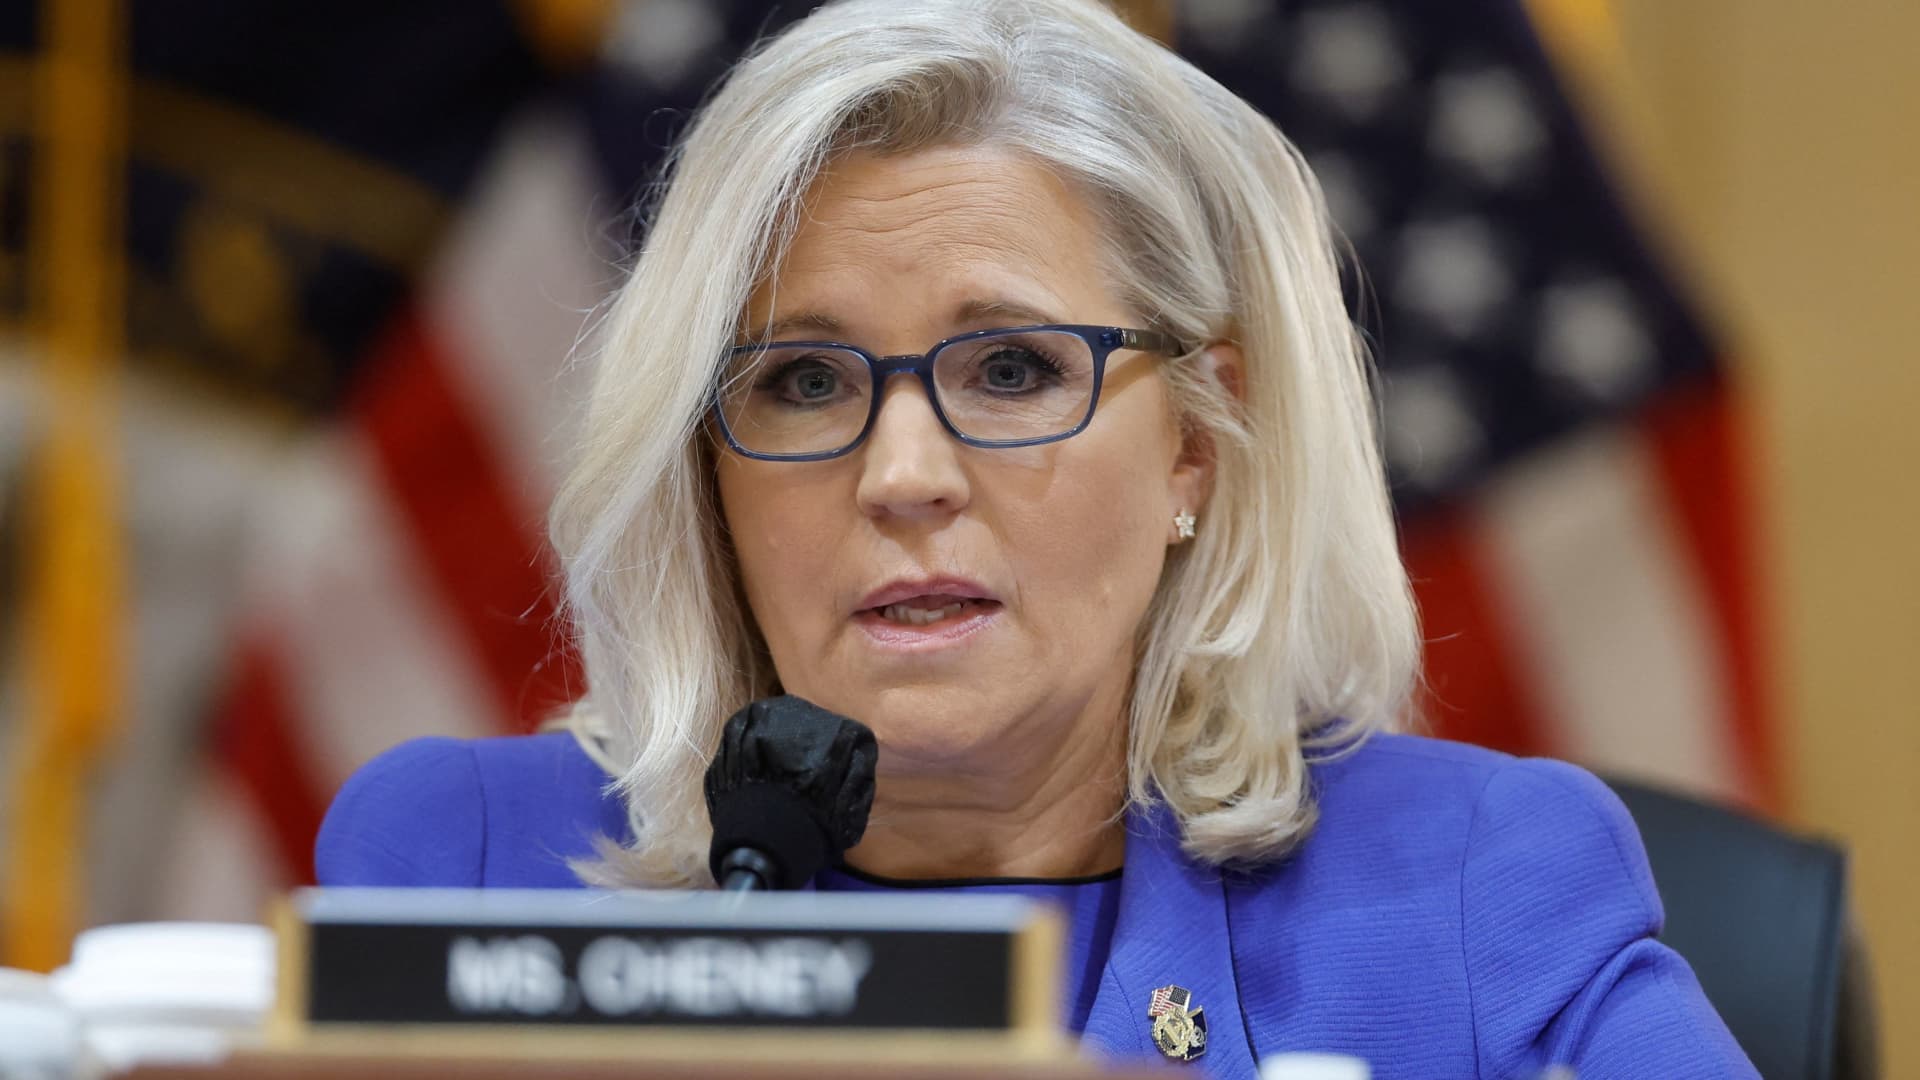 Committee Vice Chair U.S. Representative Liz Cheney (R-WY) gives her opening statement during the public hearing of the U.S. House Select Committee to Investigate the January 6 Attack on the United States Capitol, on Capitol Hill in Washington, U.S., June 9, 2022.